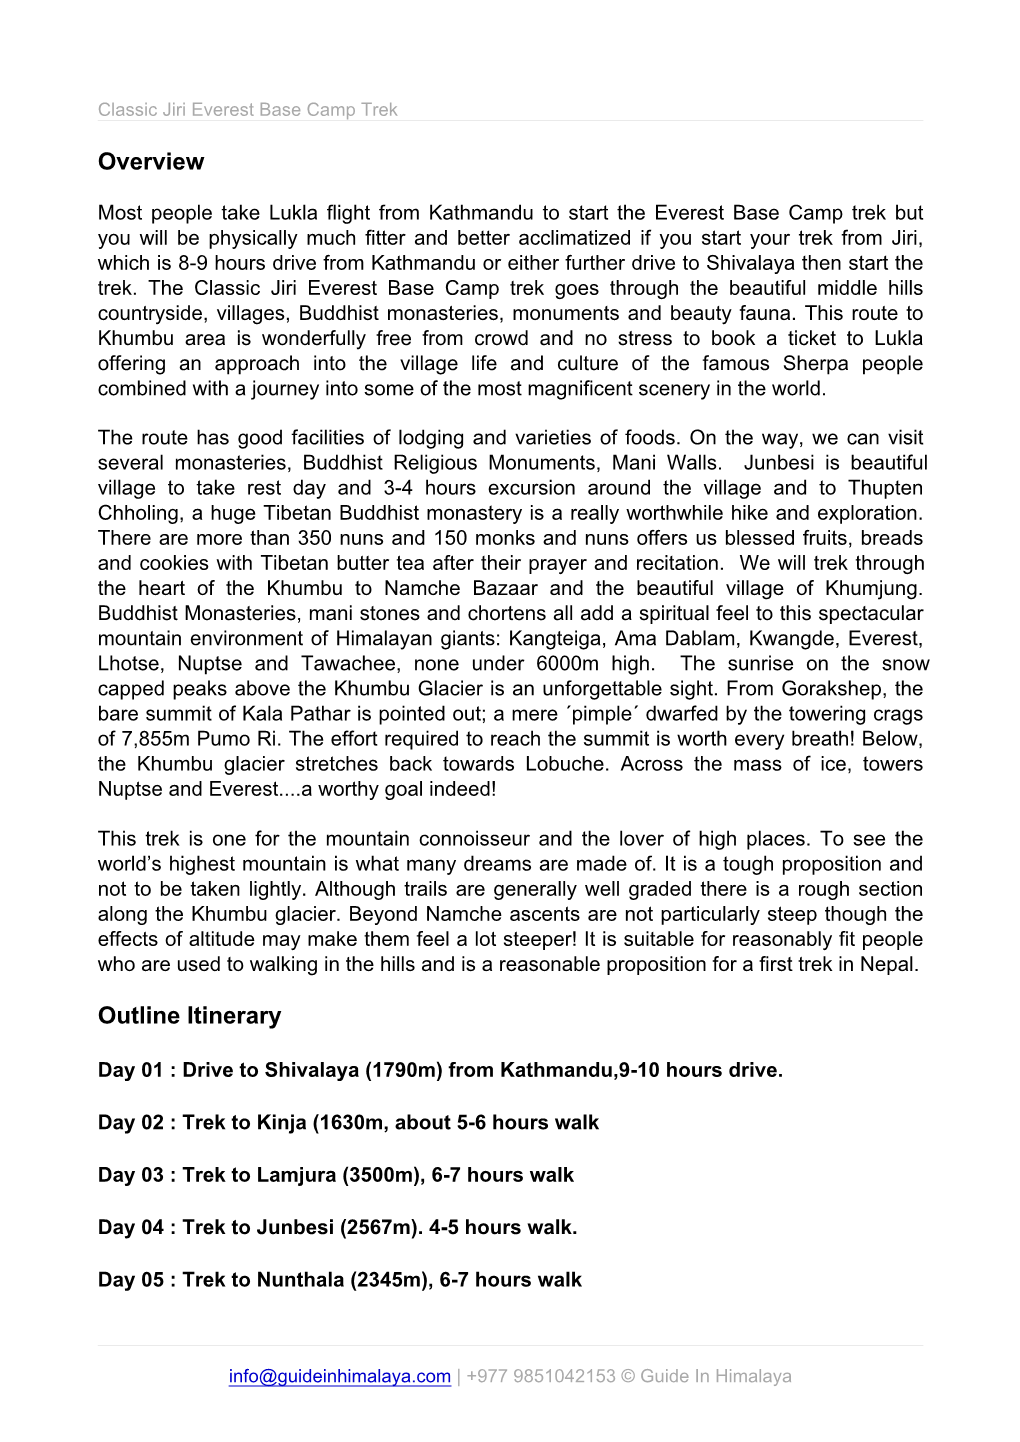 Overview Outline Itinerary